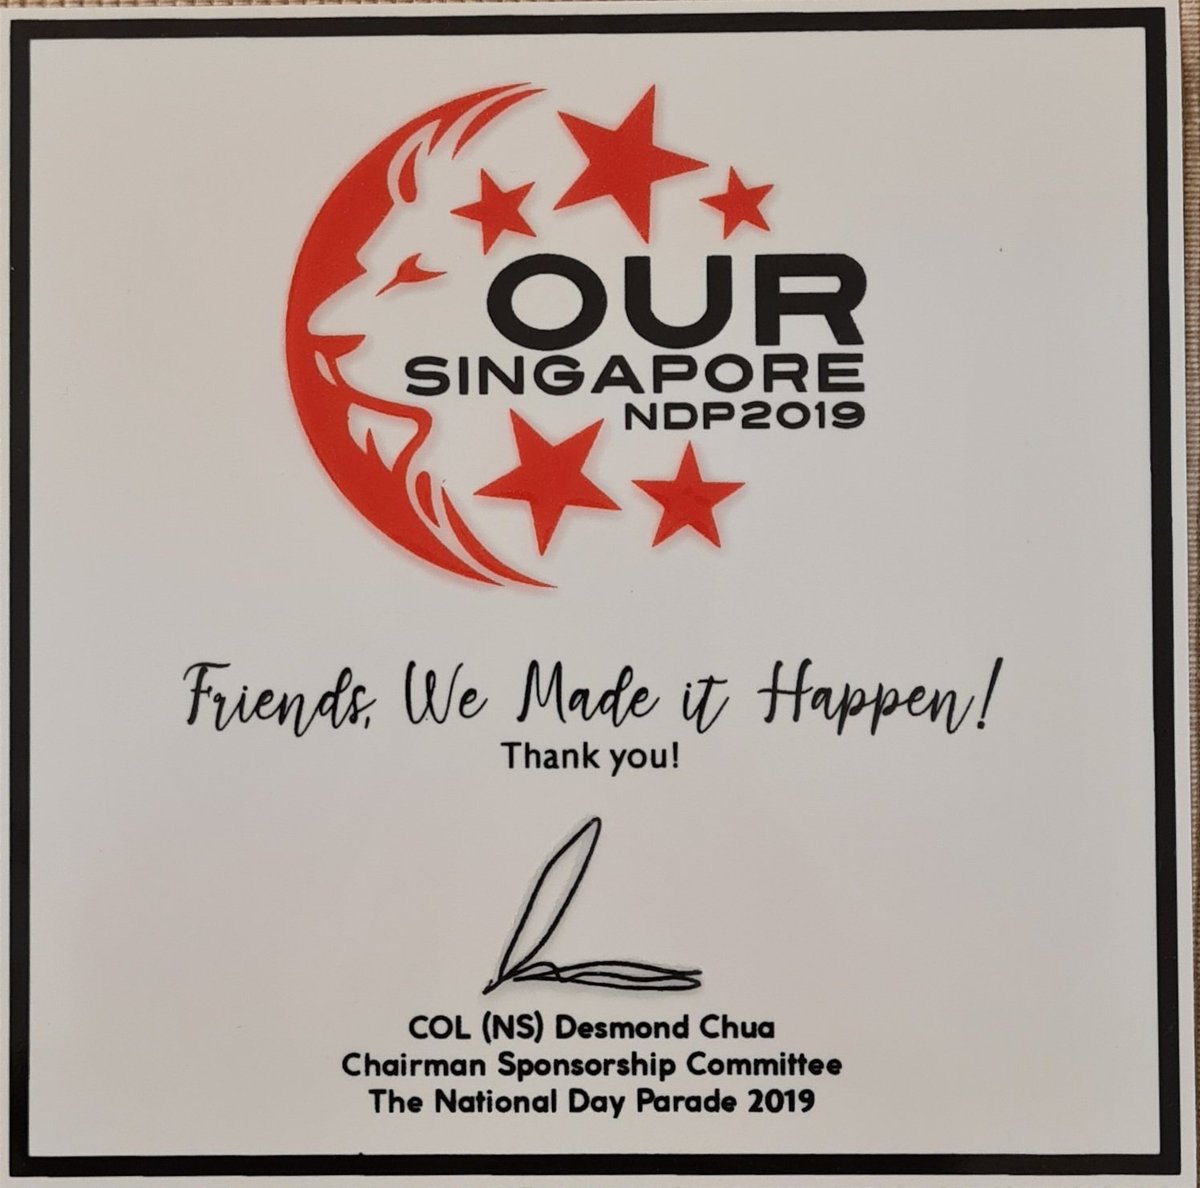 The National Day Parade 2019